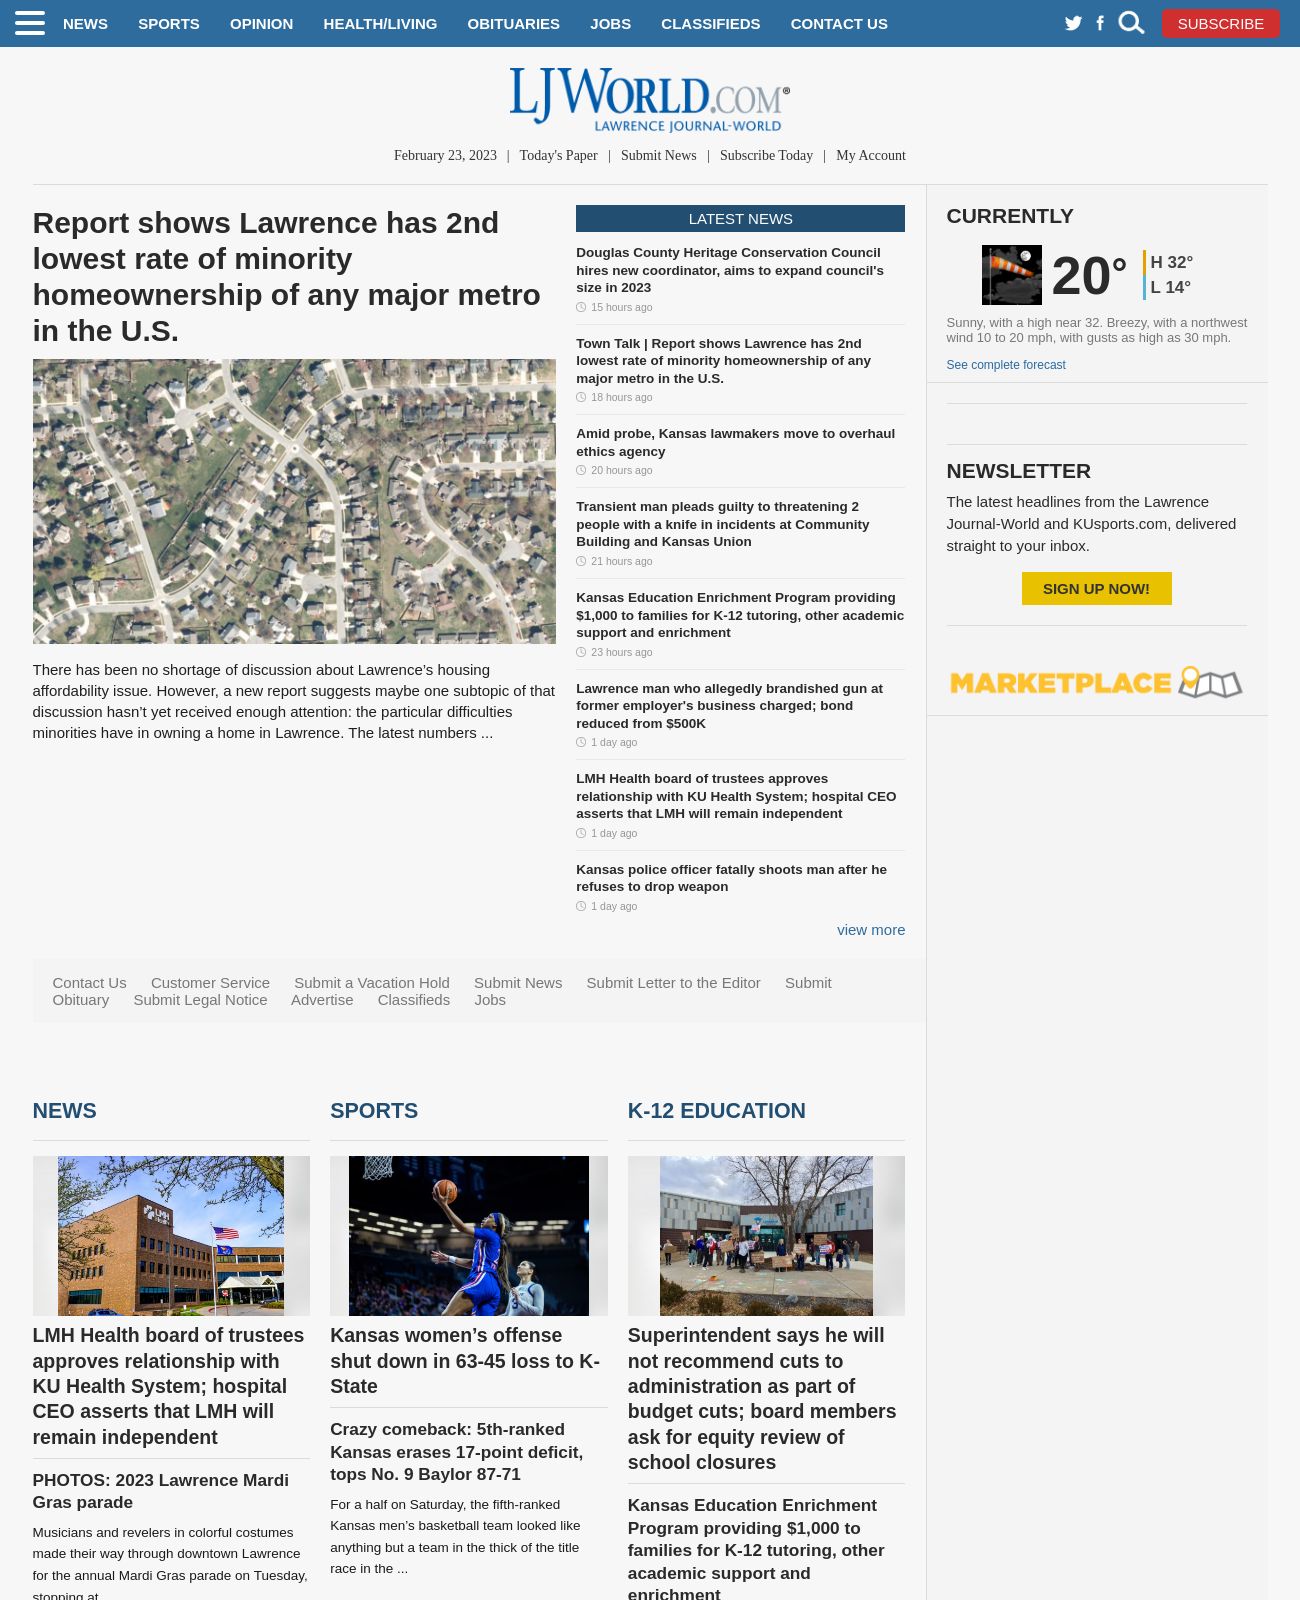 Lawrence Journal-World at 2023-02-23 05:25:05-06:00 local time